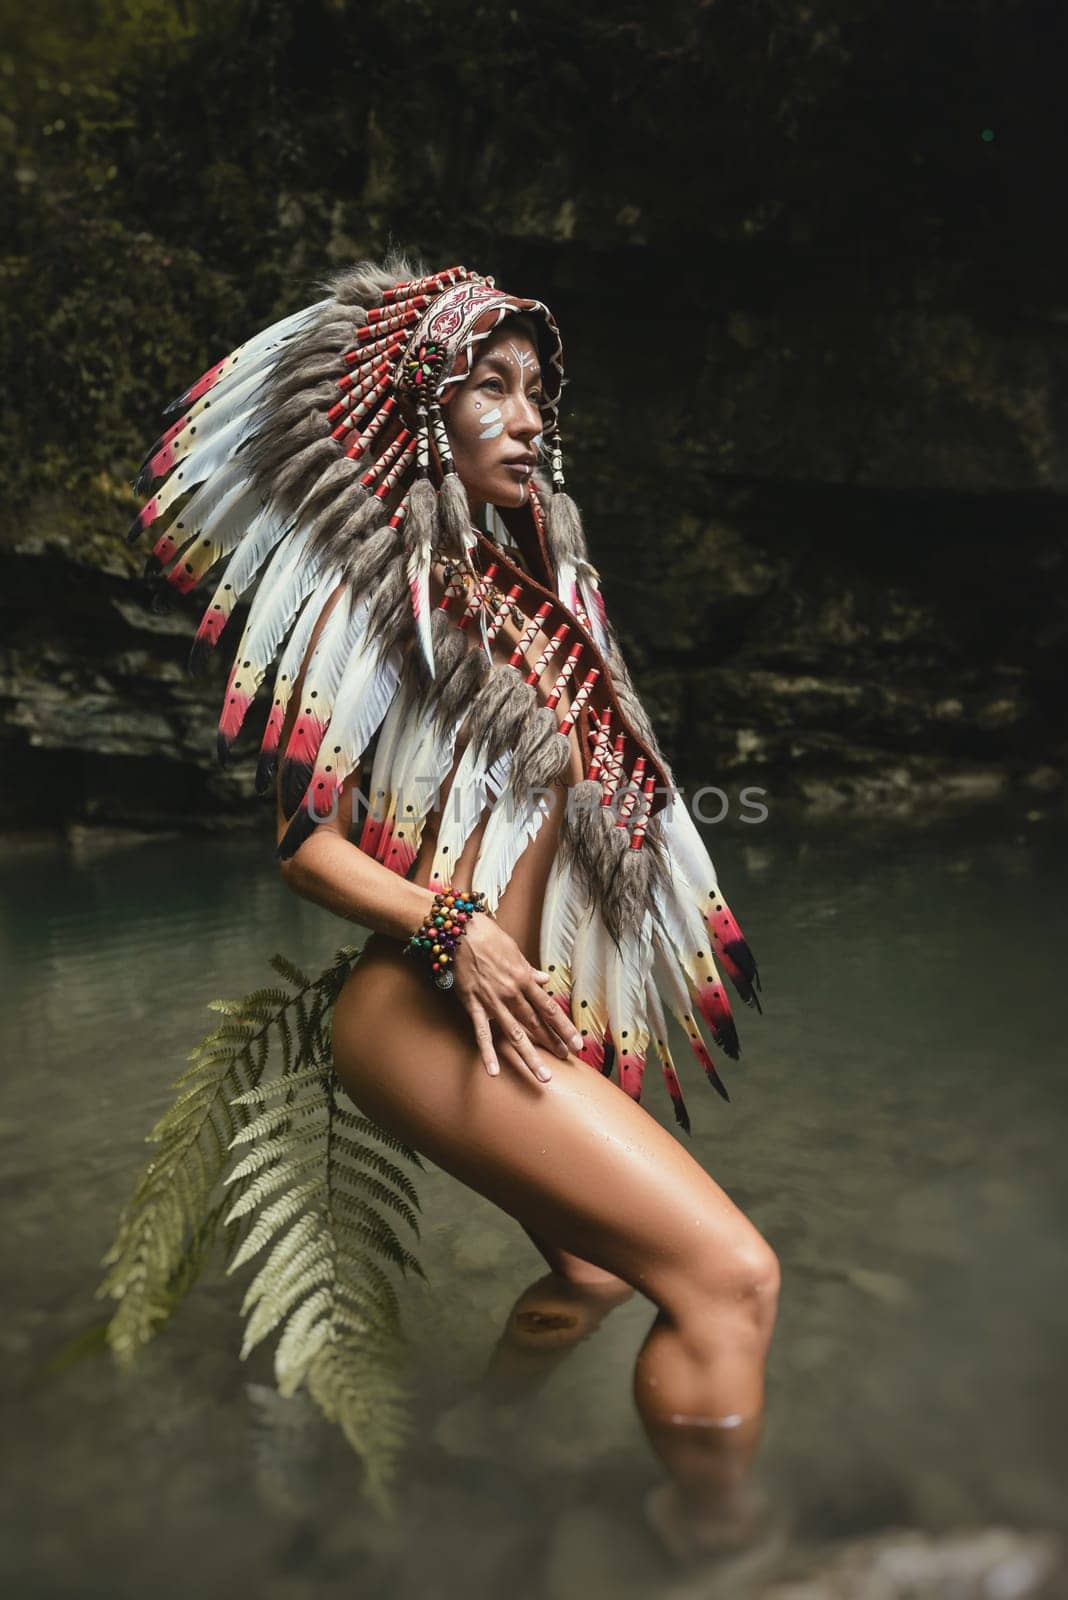 Naked girl in Native American headdresses poses sexually against the backdrop of wildlife by Rotozey